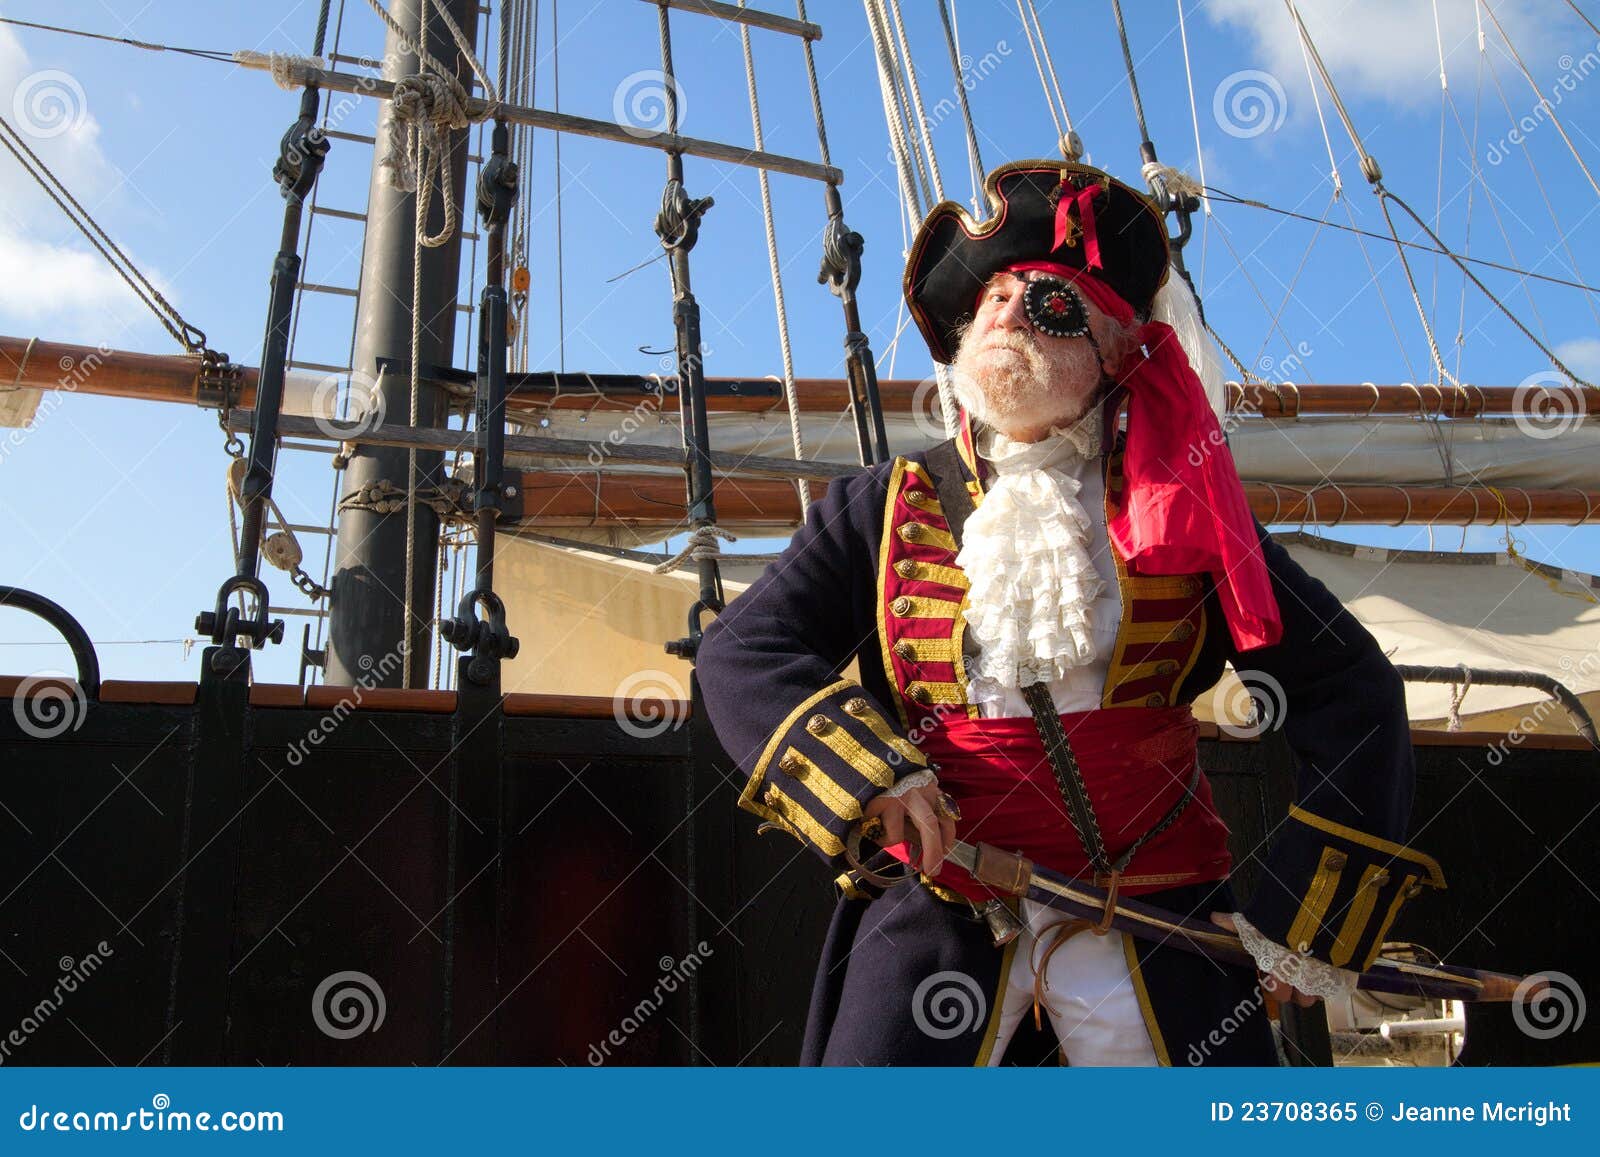 proud pirate with pirate ship royalty free stock photo